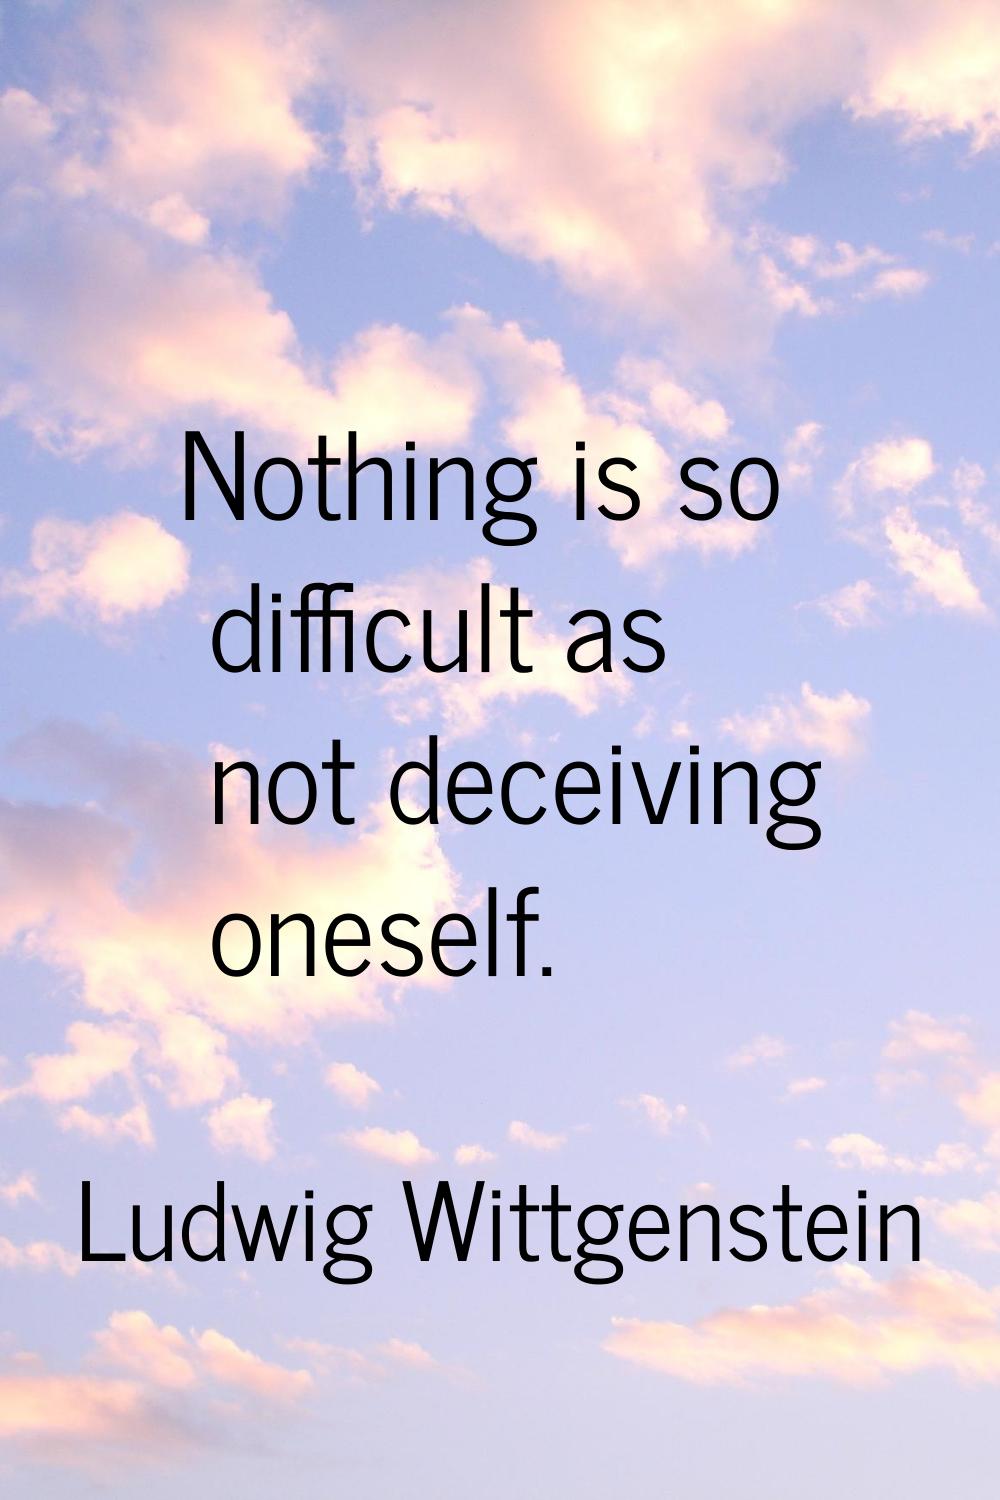 Nothing is so difficult as not deceiving oneself.